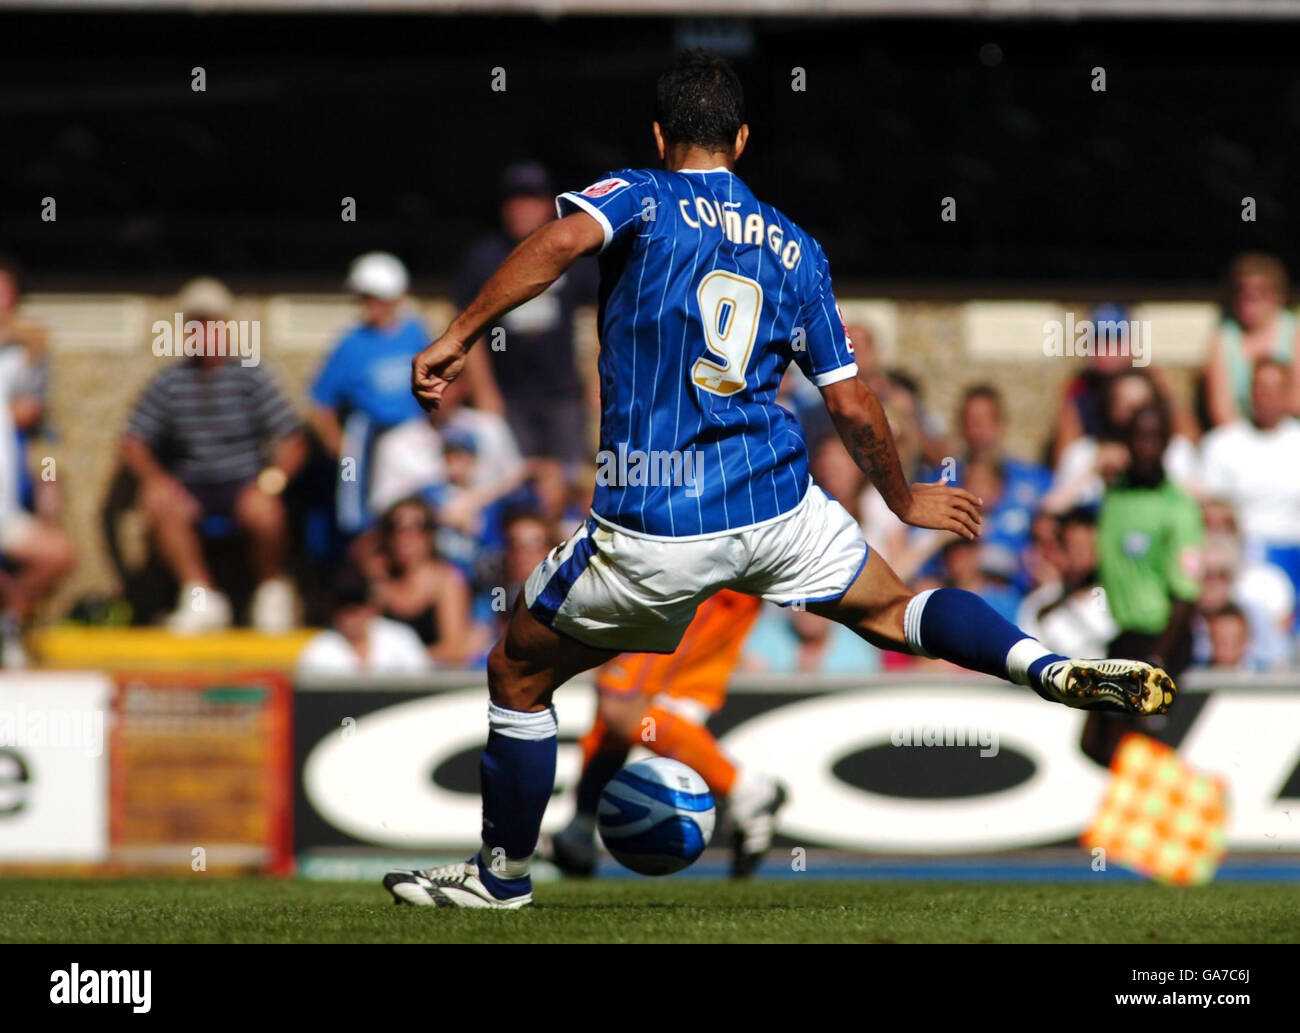 Ipswich Town's Pablo Counago scores the fourth goal during the Coca-Cola Football League Championship match at Portman Road, Ipswich. Stock Photo